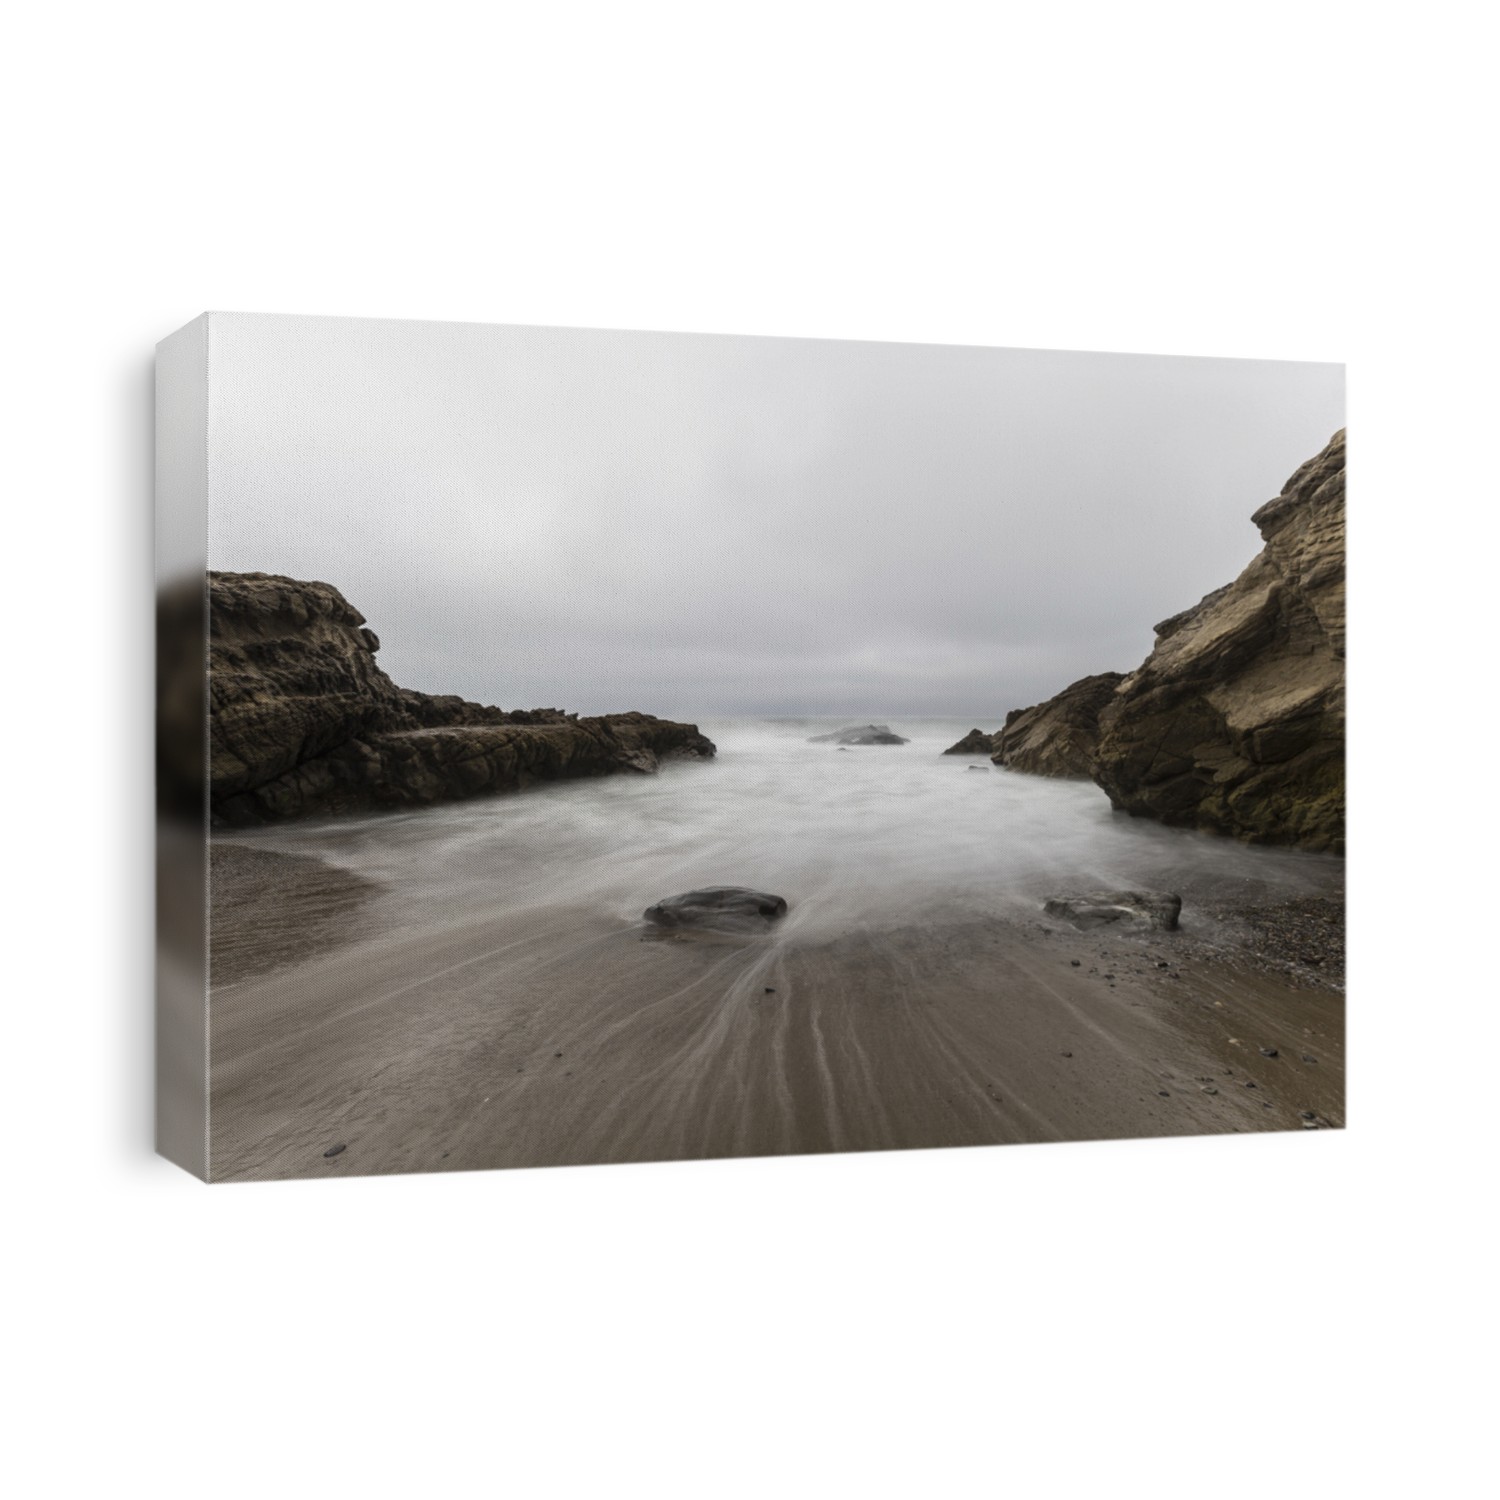 Rocky cove with motion blurred water at Leo Carrillo State Beach in Malibu, California.